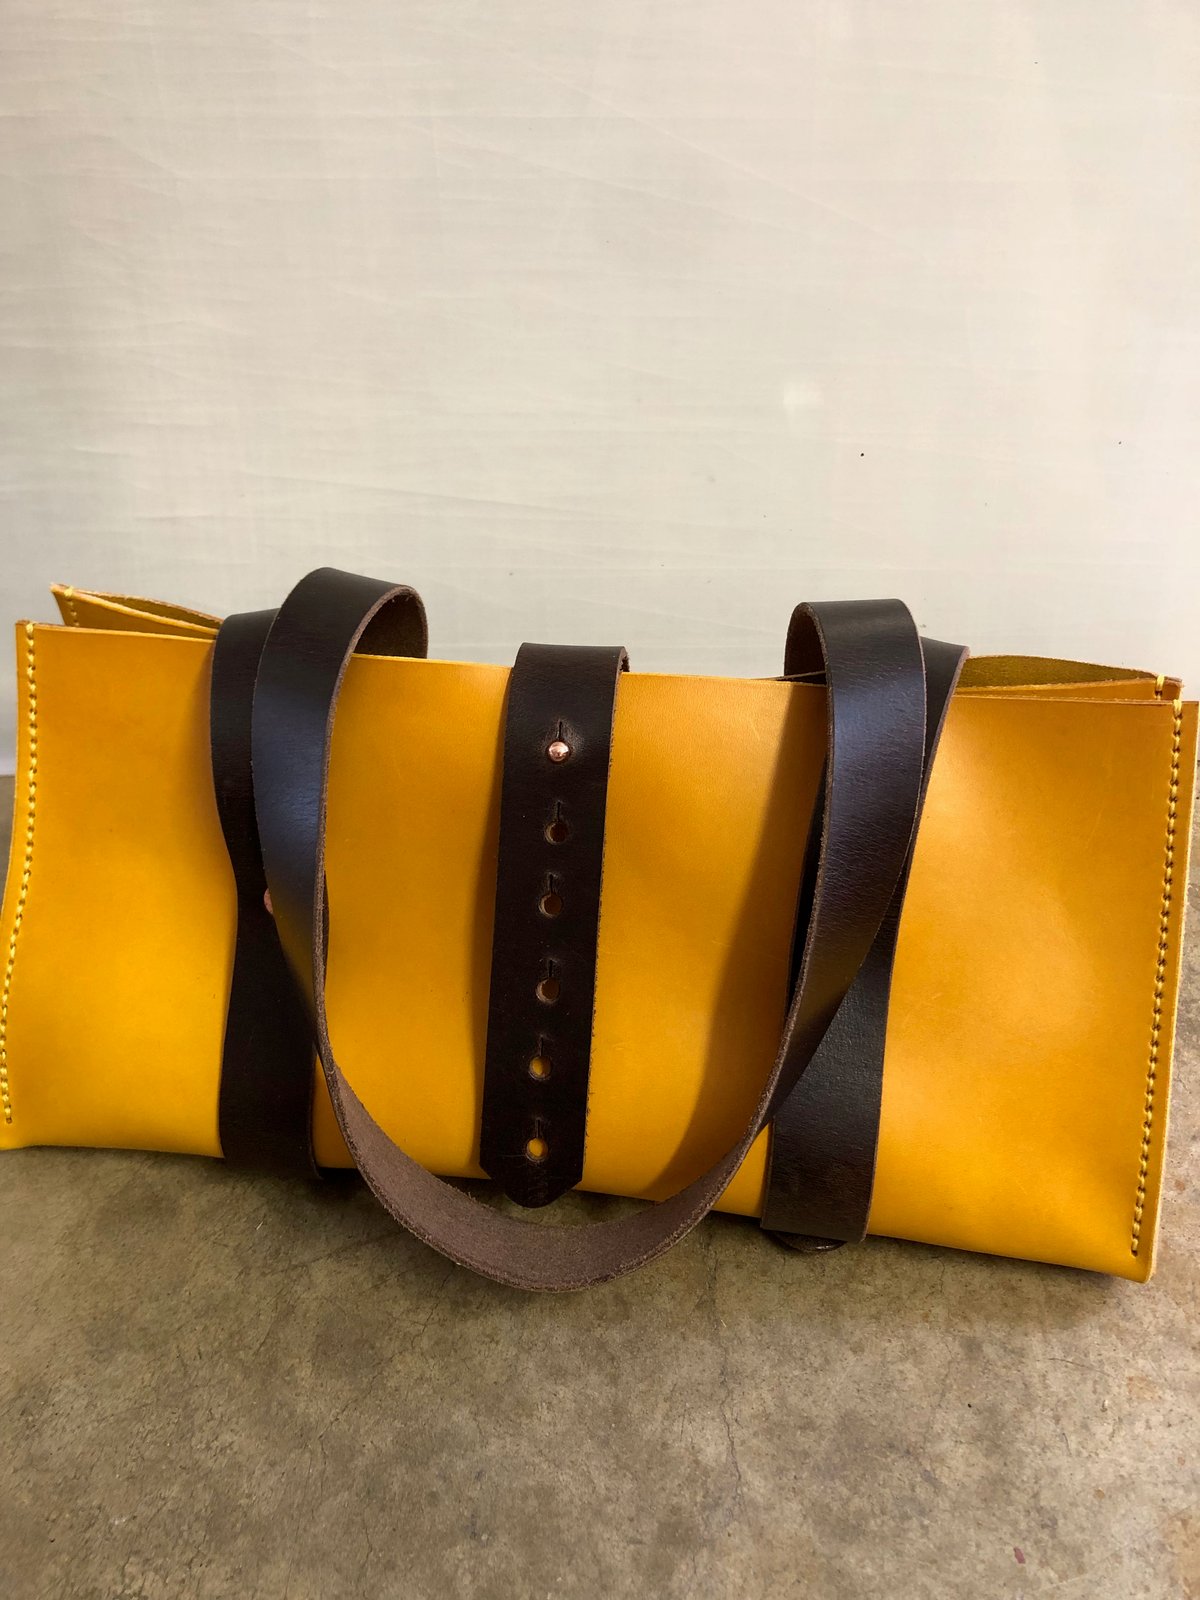 Buy RICHFIELD JEENY Leather handbags, shoulder bag purse with long strap  Zipper Inner Material Polycotton Attractive Color Mustard Yellow at  Amazon.in